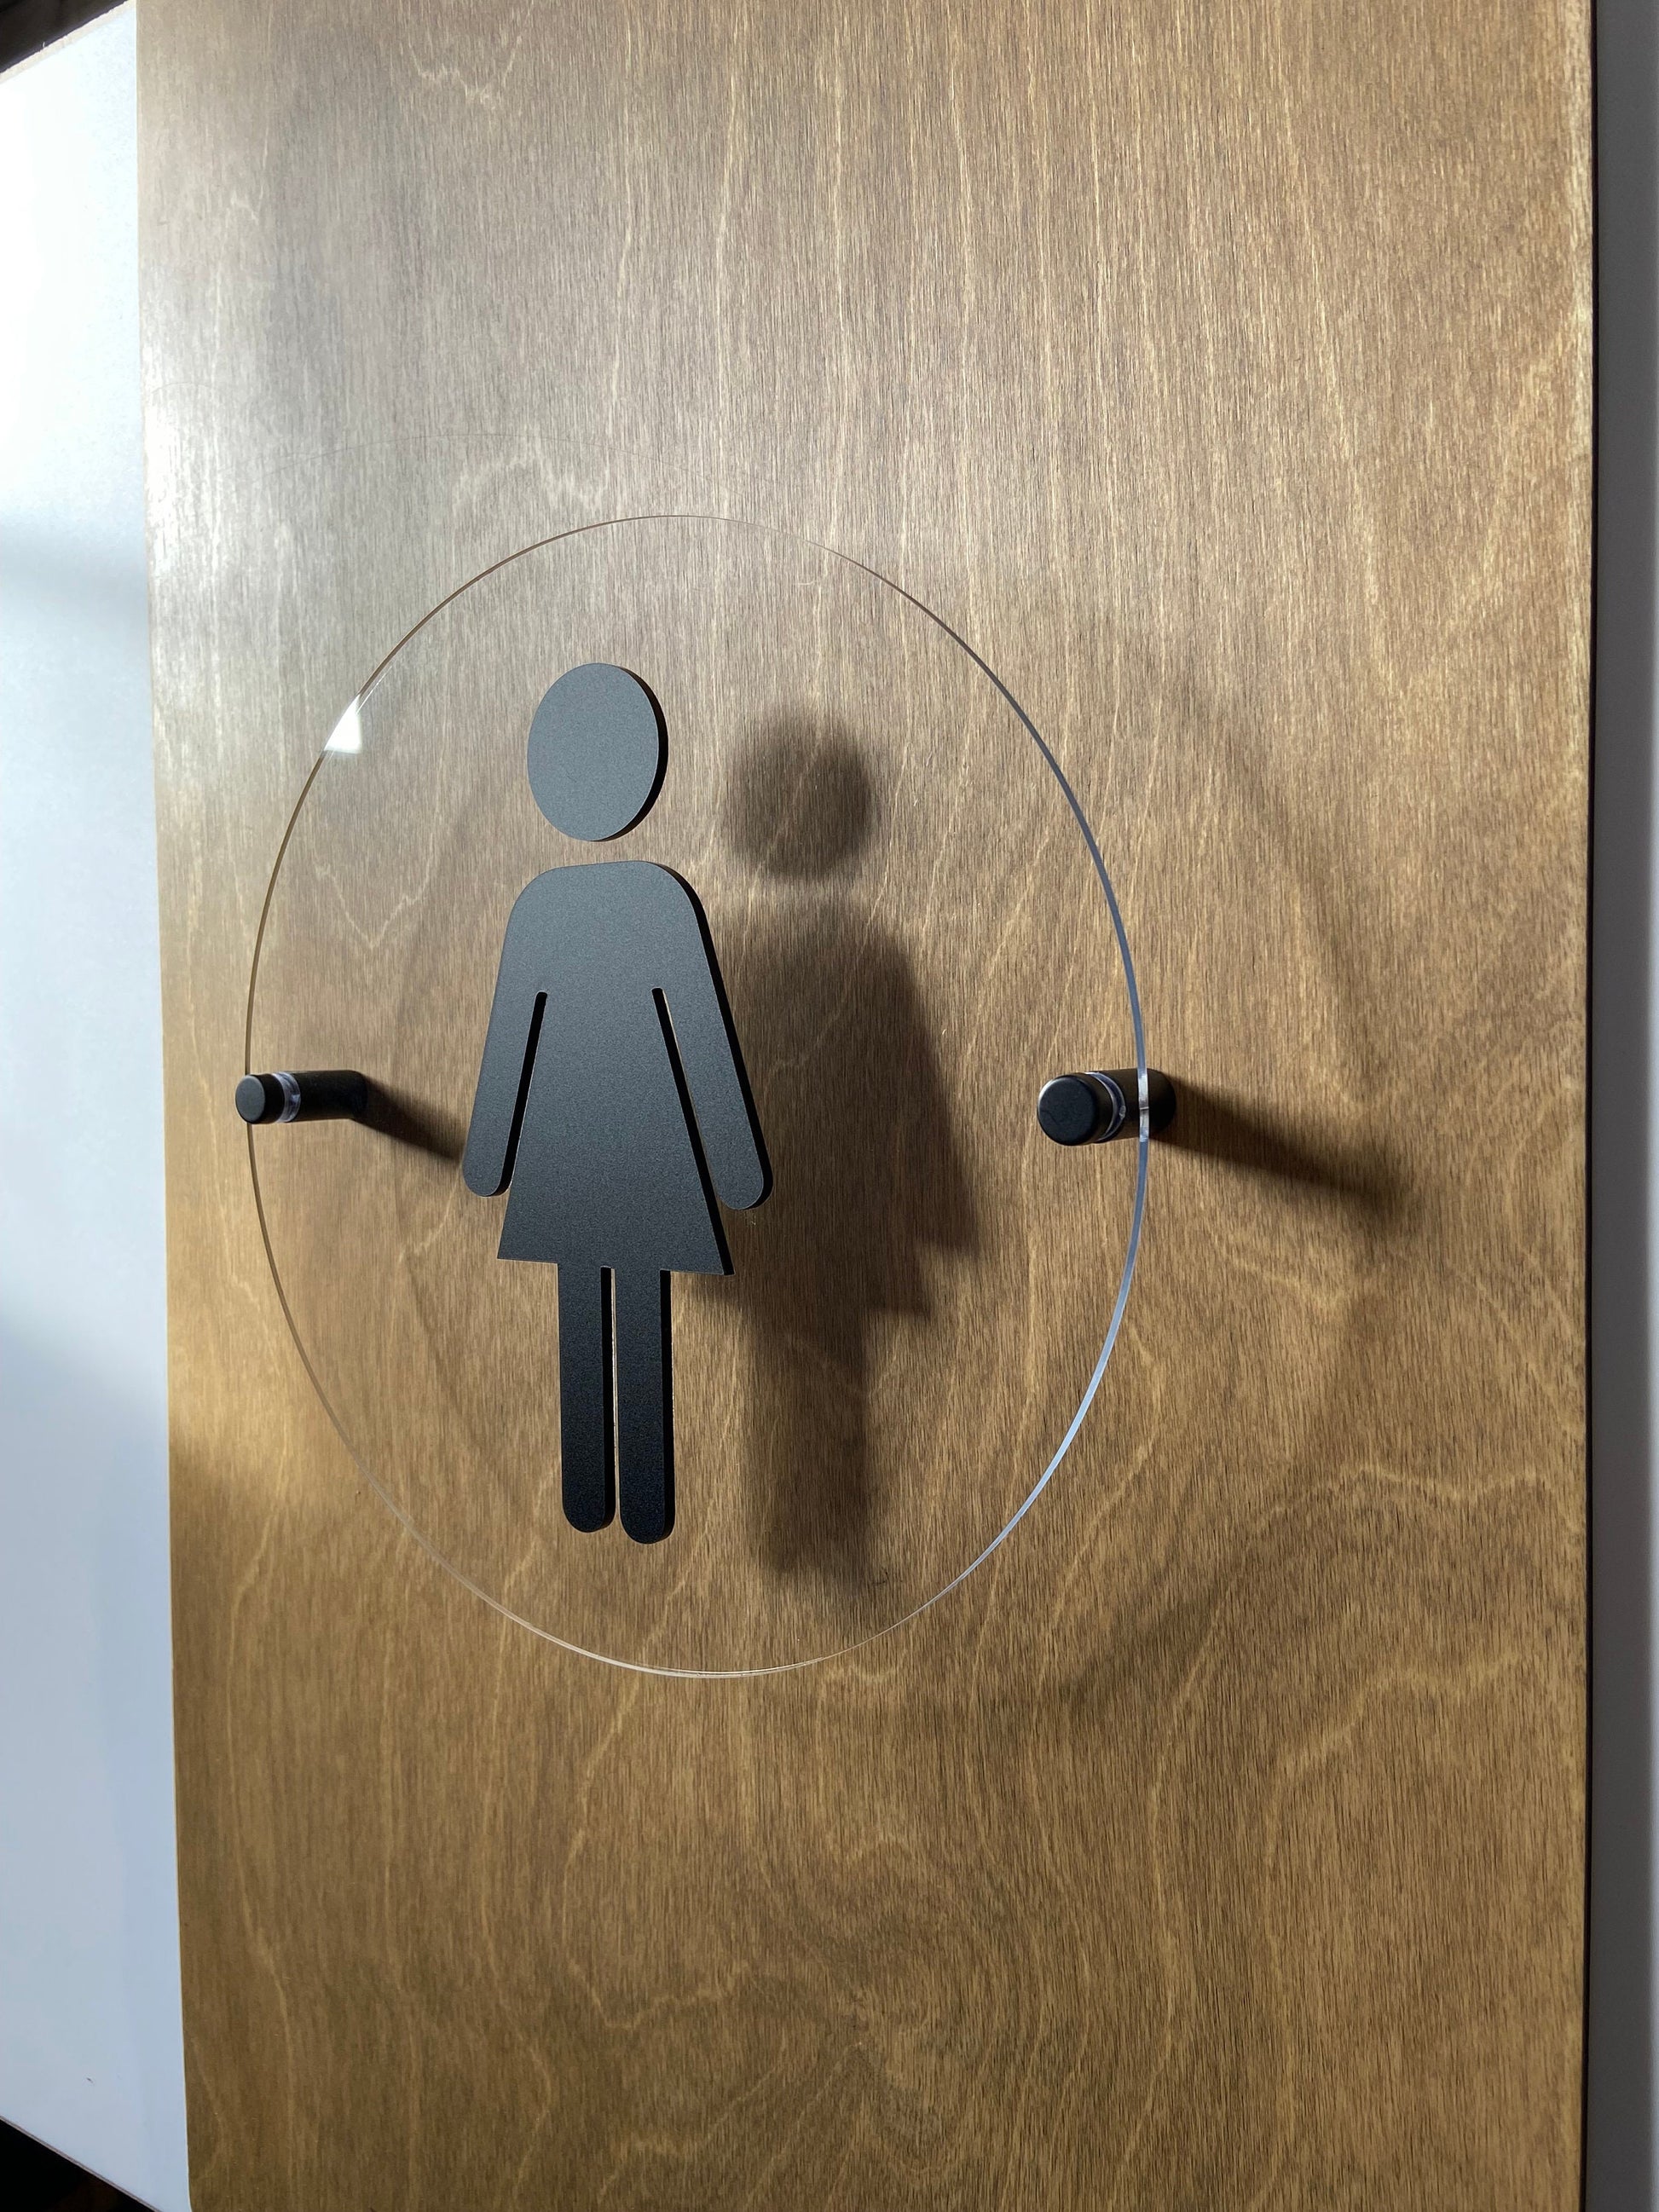 Clear Acrylic Floating Restroom Signs | Office Cafe Business Men Women Handicap Bathroom 9 x 9 "| Priced per sign not as a set